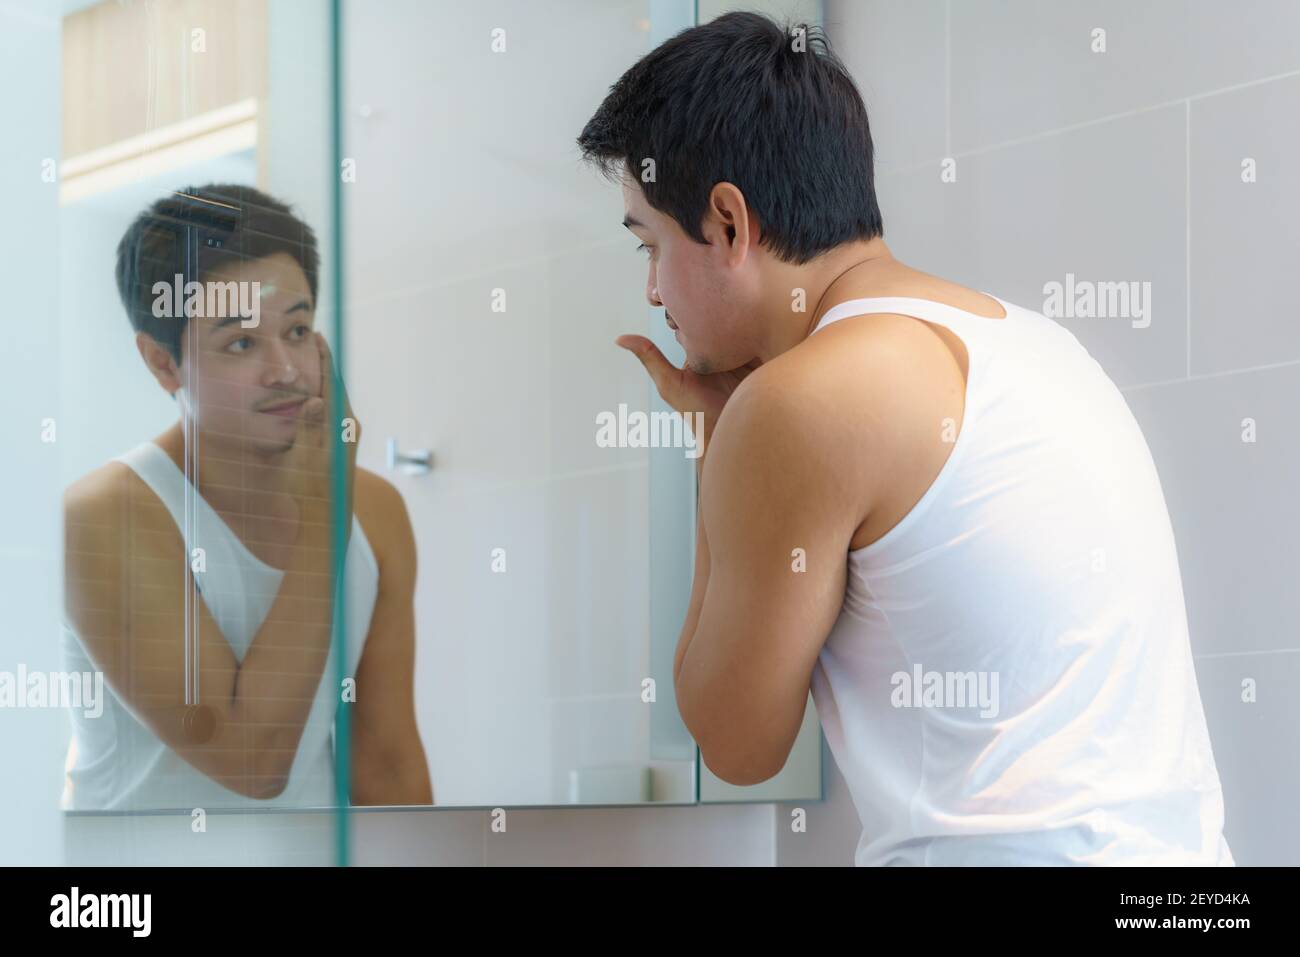 Asian man are applying moisturizer facial cream to his face after bathing and getting ready to work in the bathroom in the house. Stock Photo